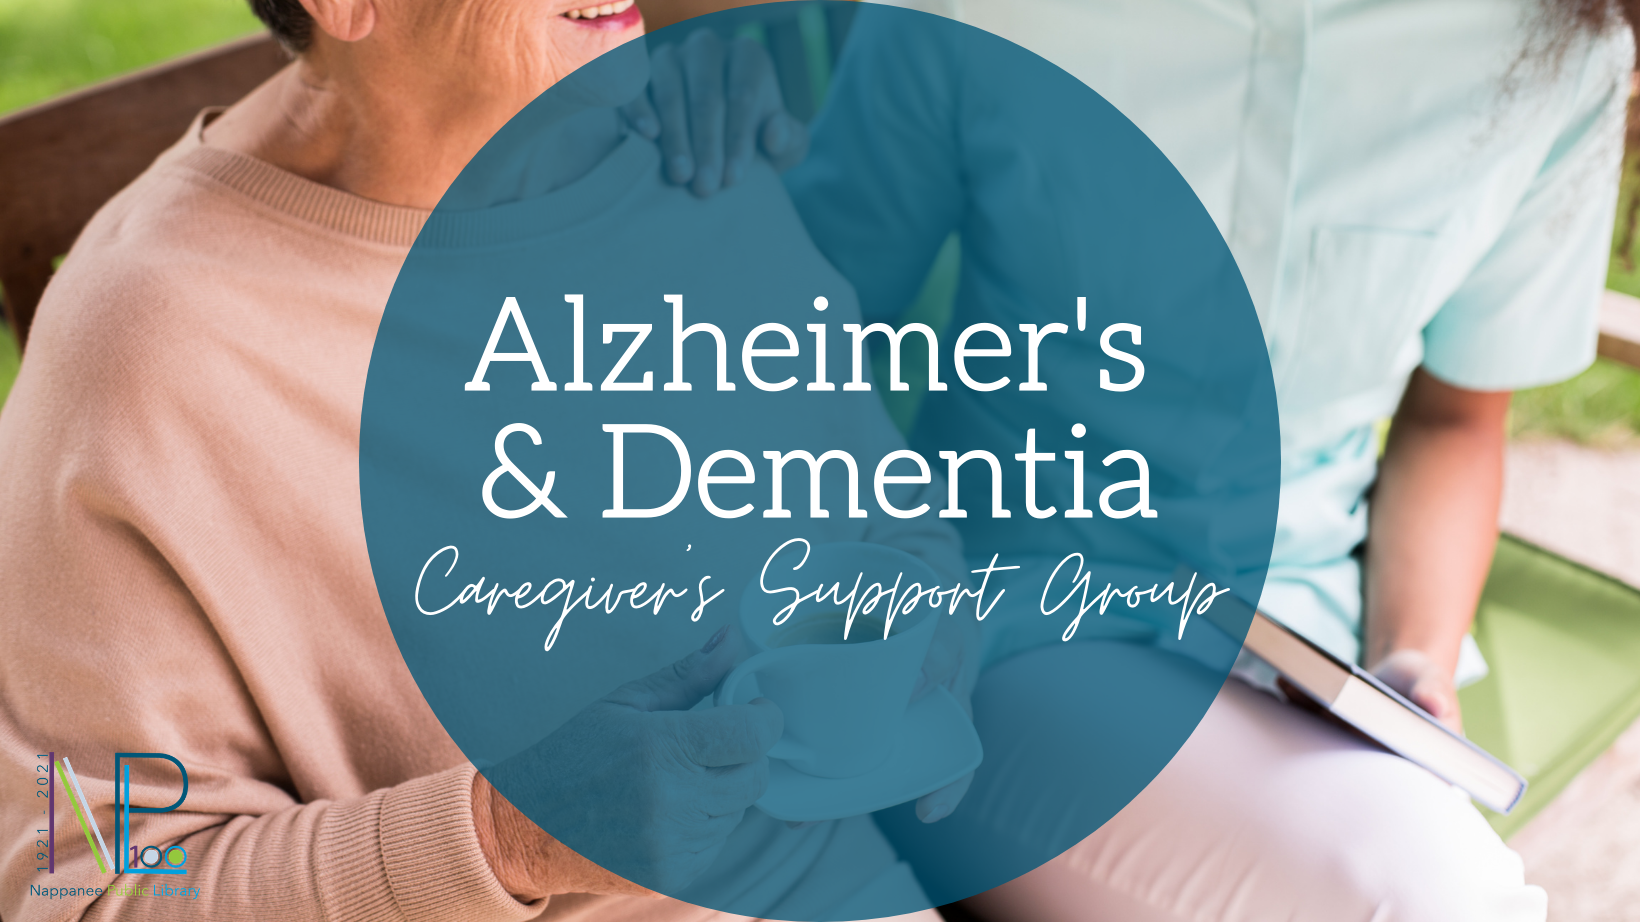 Alzheimer's and Dementia Caregivers Support Group